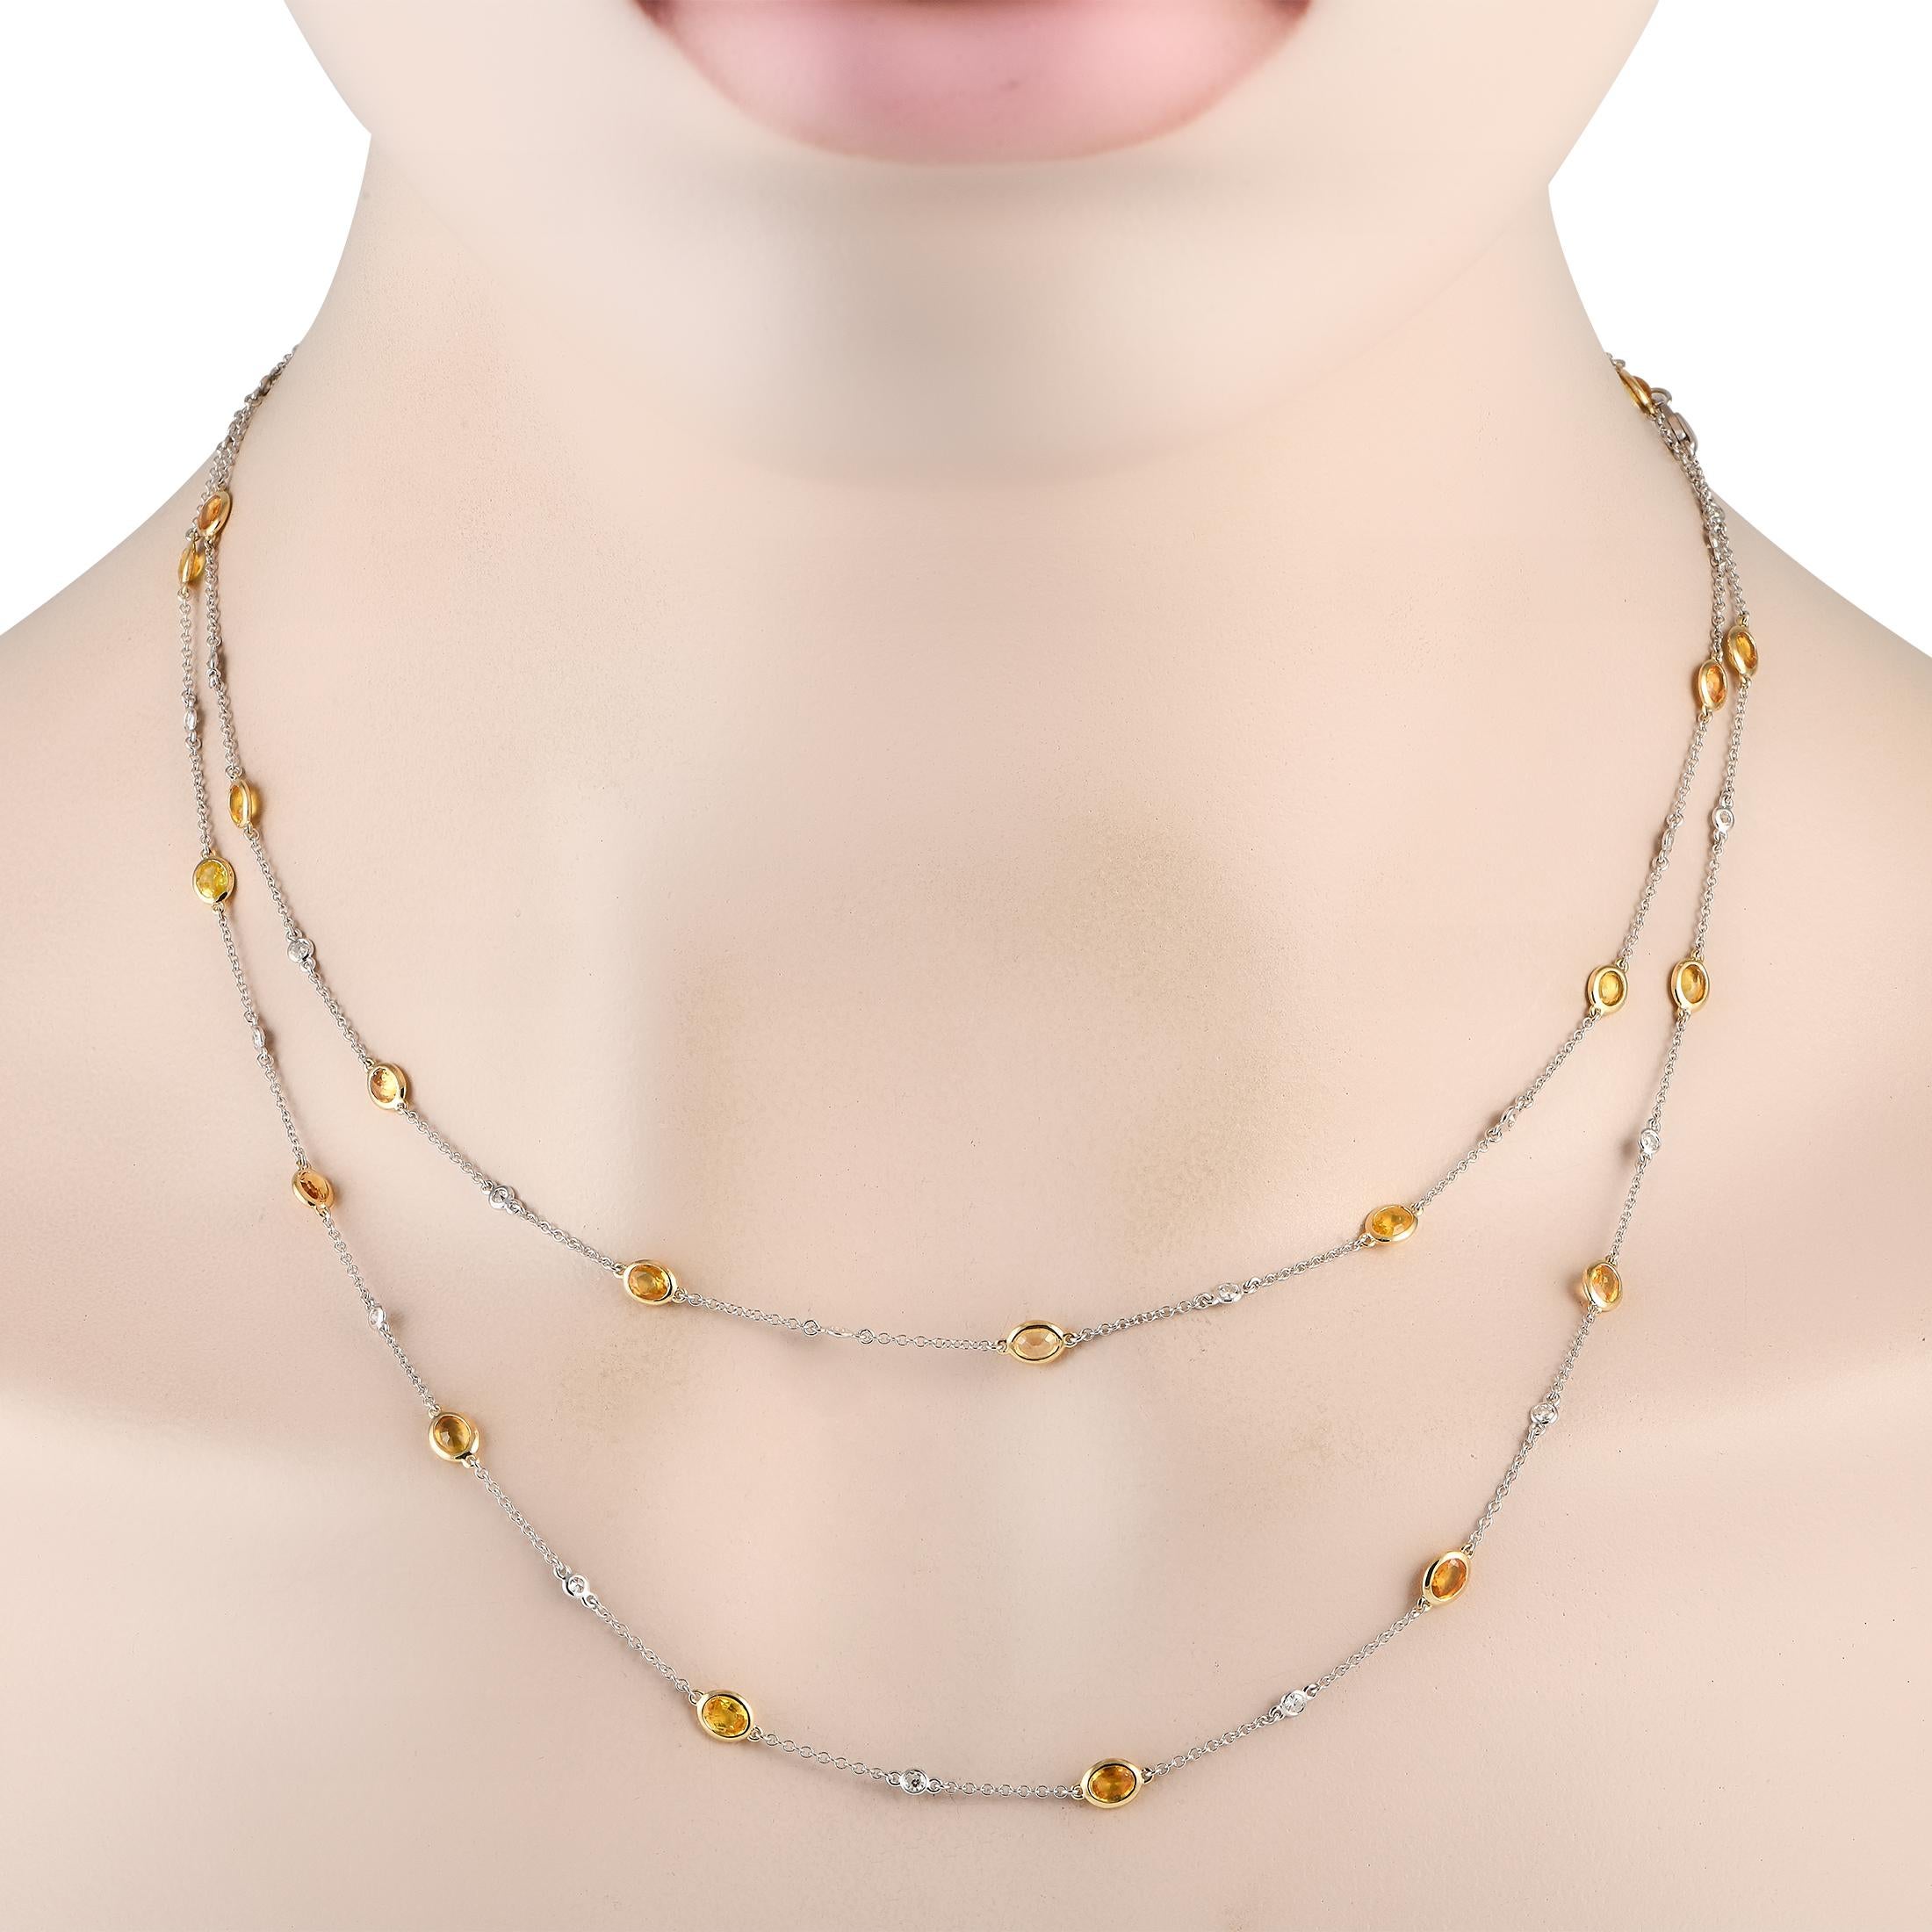 Add a pop of color to any ensemble with this classically elegant necklace. This pieces delicate 36 chain is adorned with 0.49 carats of sparkling diamond accents and striking yellow sapphire gemstones with a total weight of 5.29 carats.This jewelry